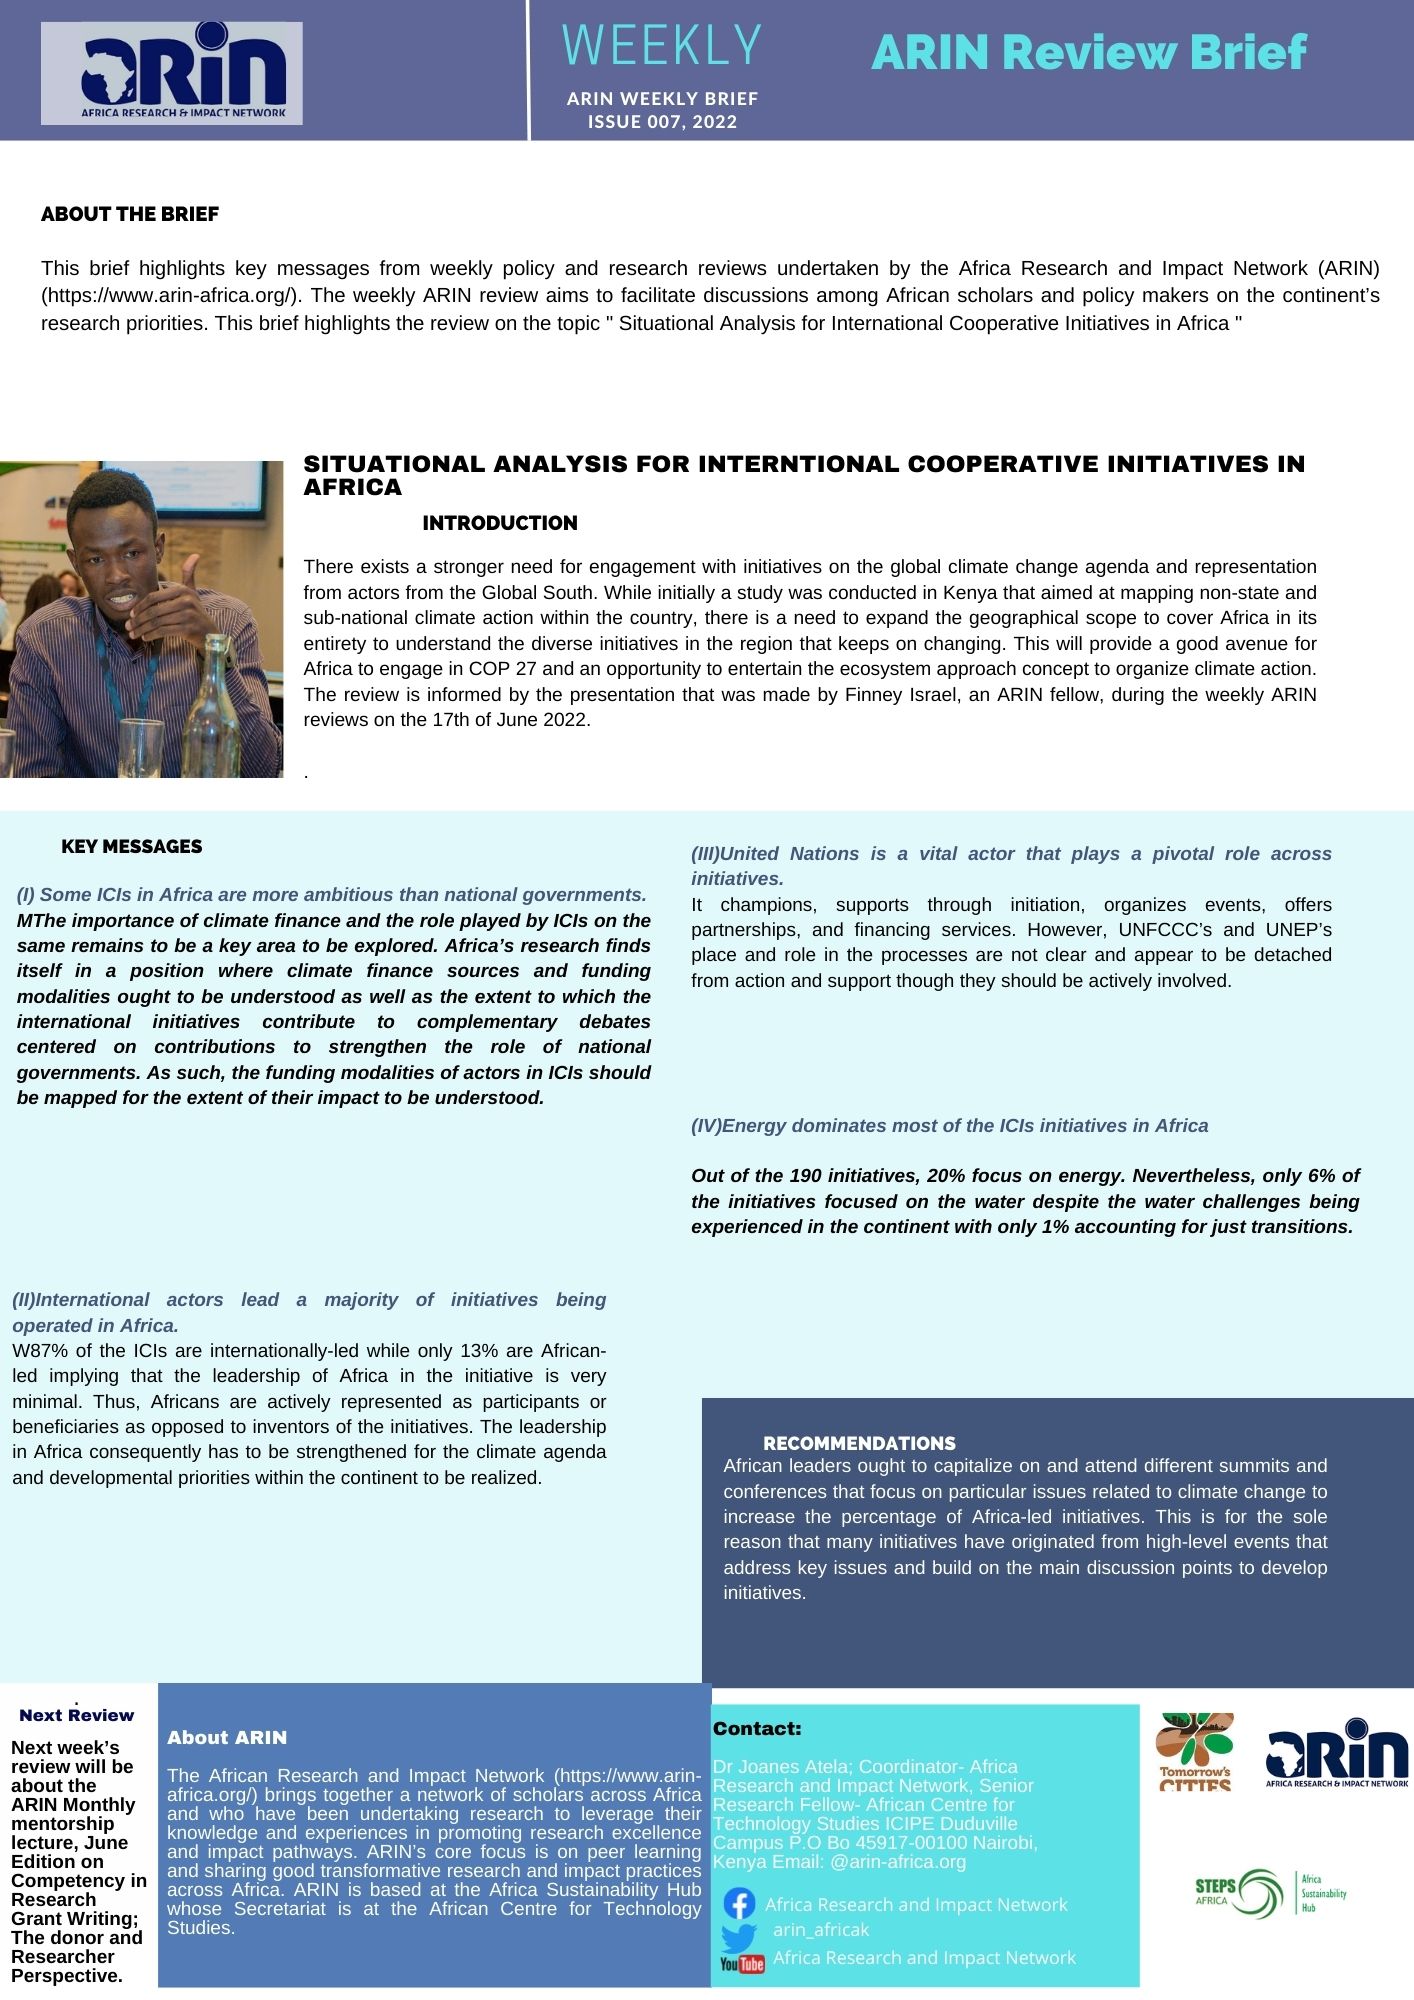 Situational Analysis For International Cooperatives Initiatives In Africa